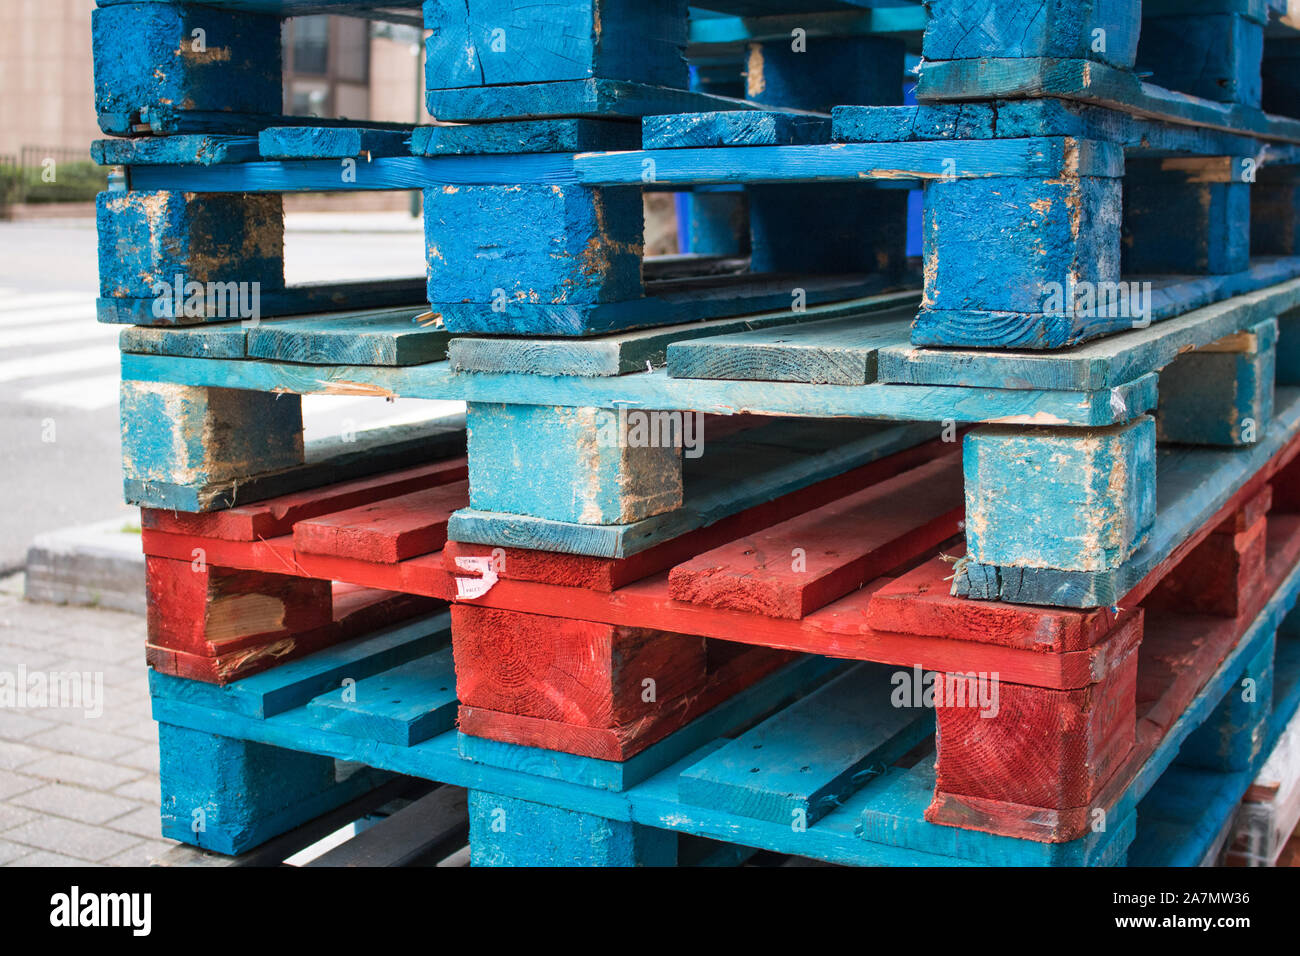 Wooden Pallets In Color Blue Light Red Closeup on a streed slighty used and  torn Stock Photo - Alamy